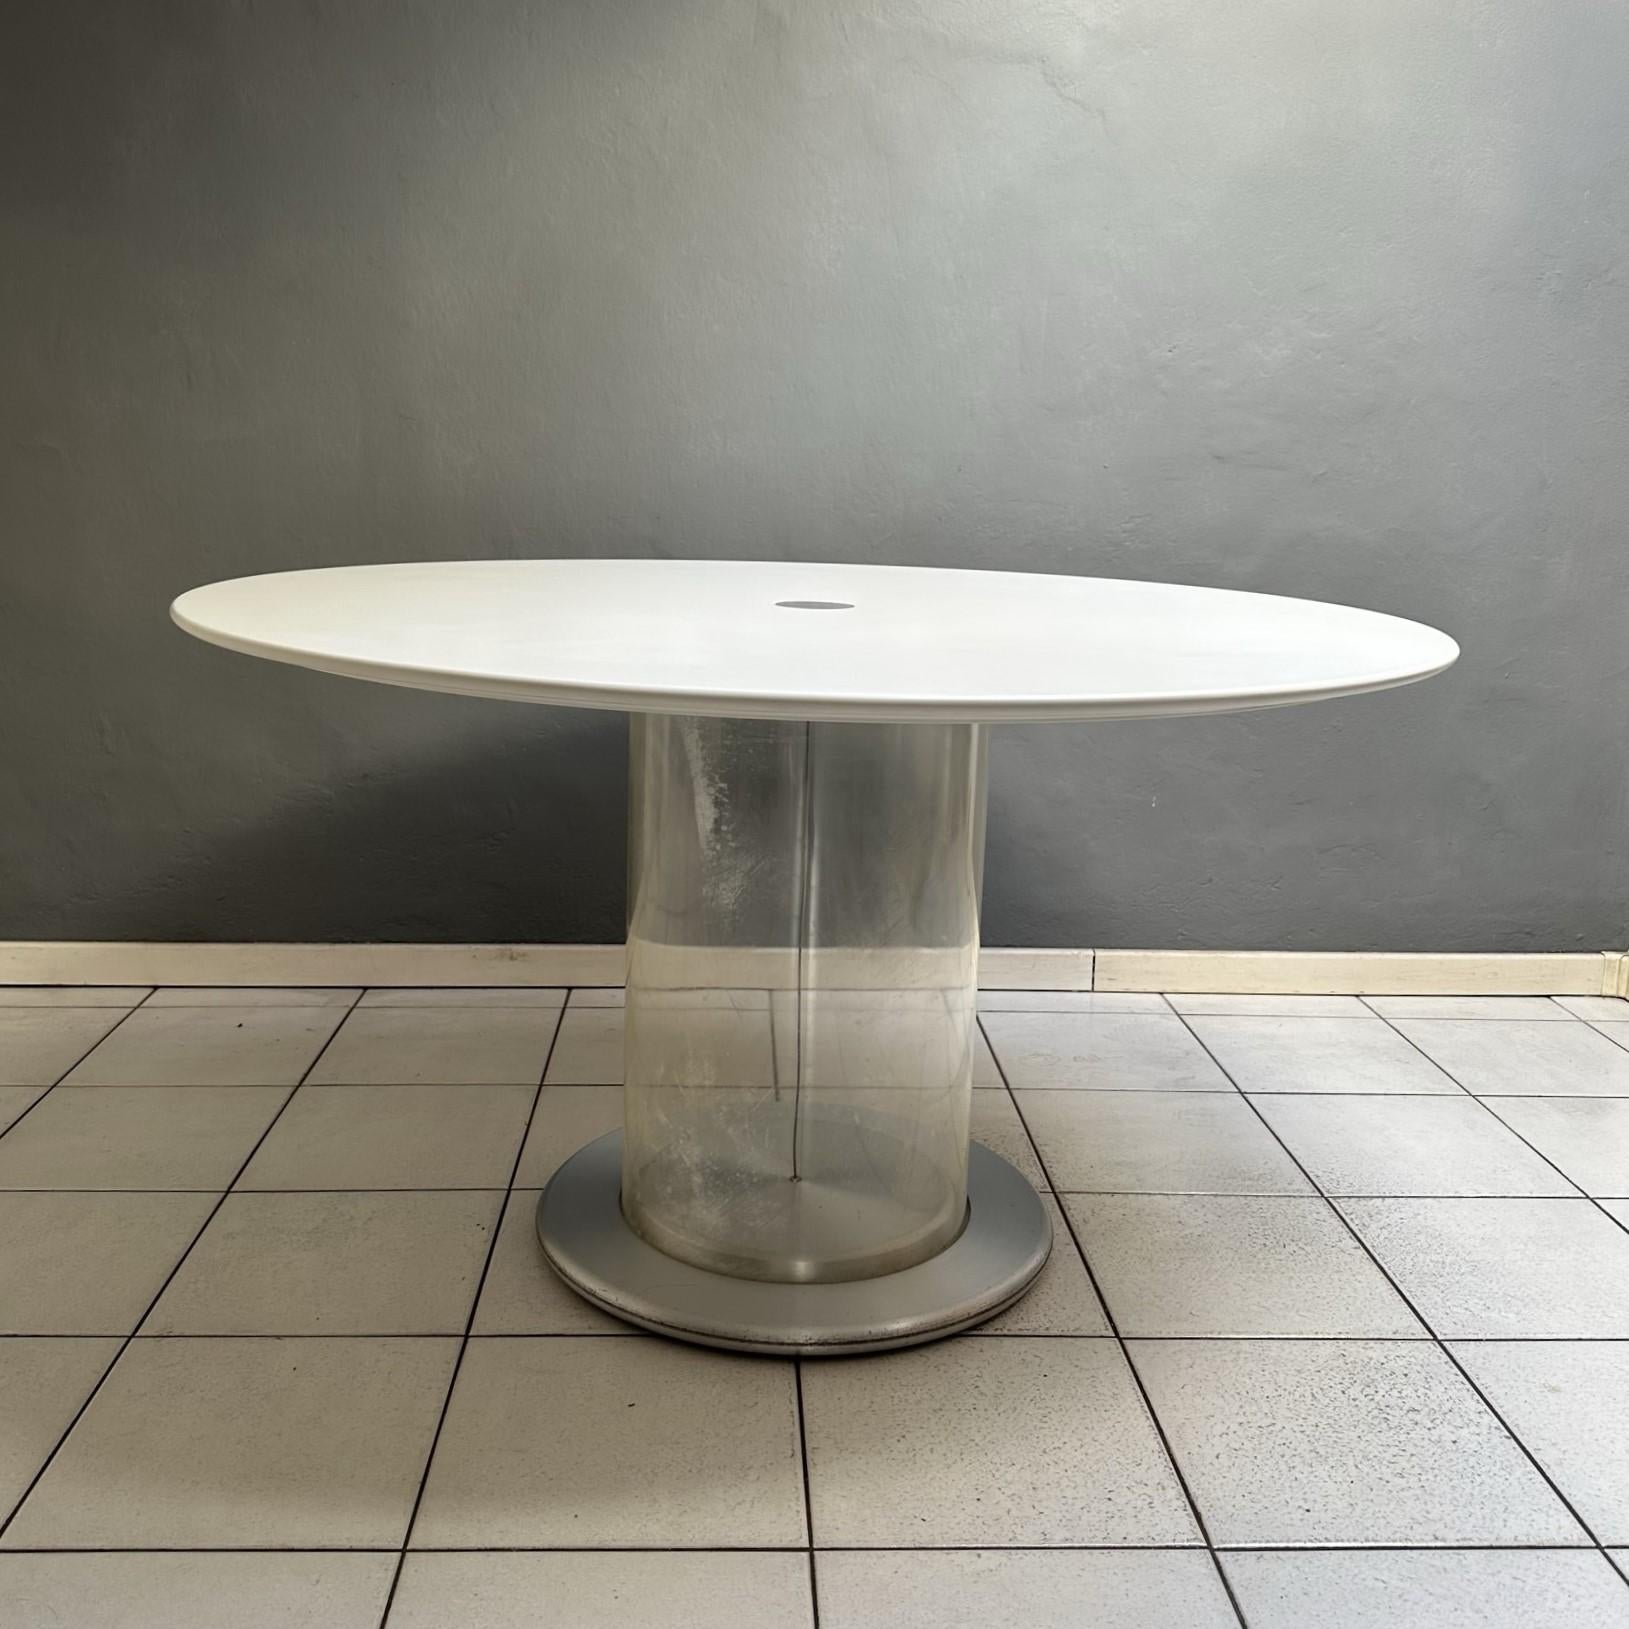 
Eclisse table from the 1960s, Italian manufacturing, design by Claudio Salocchi for Sormani.
Top in matt white lacquered wood, transparent plexiglass structure, aluminum base.
In the attached photos some signs of aging are visible: on the